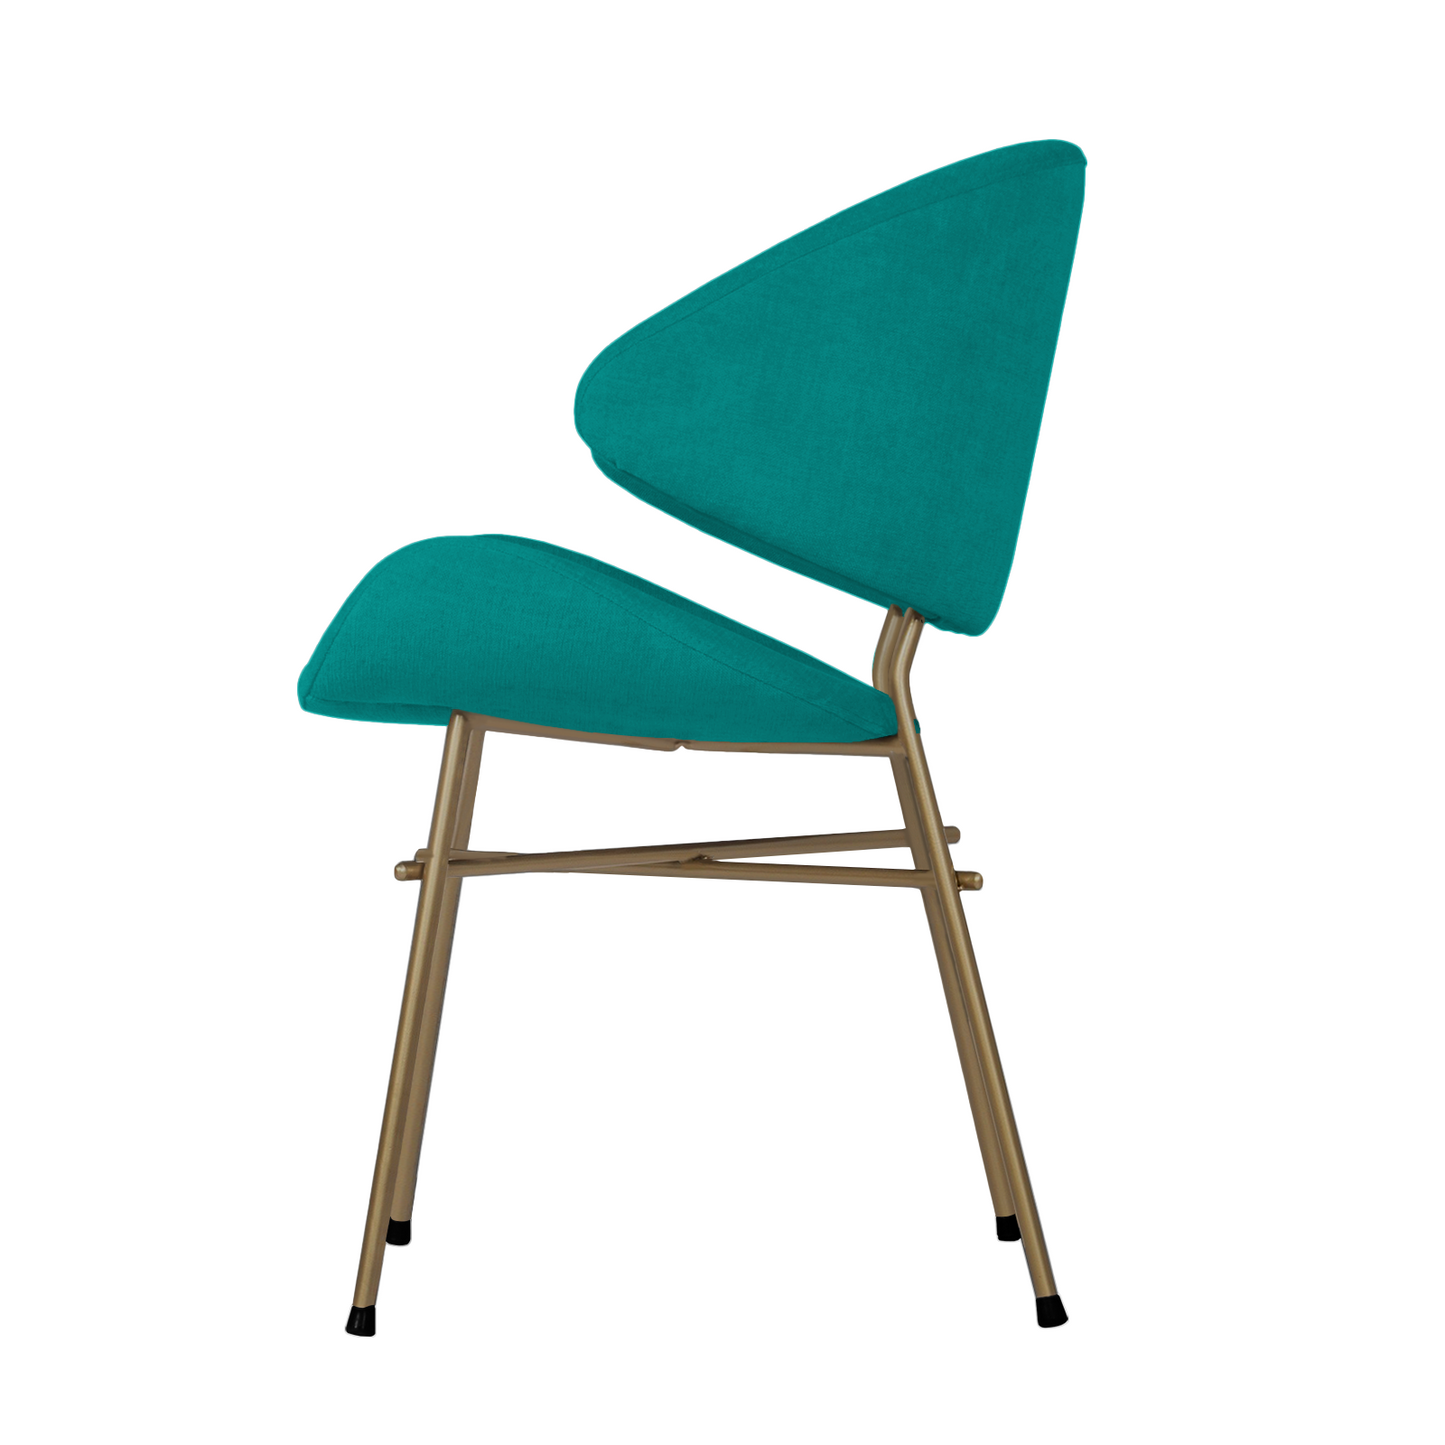 Chair Cheri Trend Copper - Turquoise